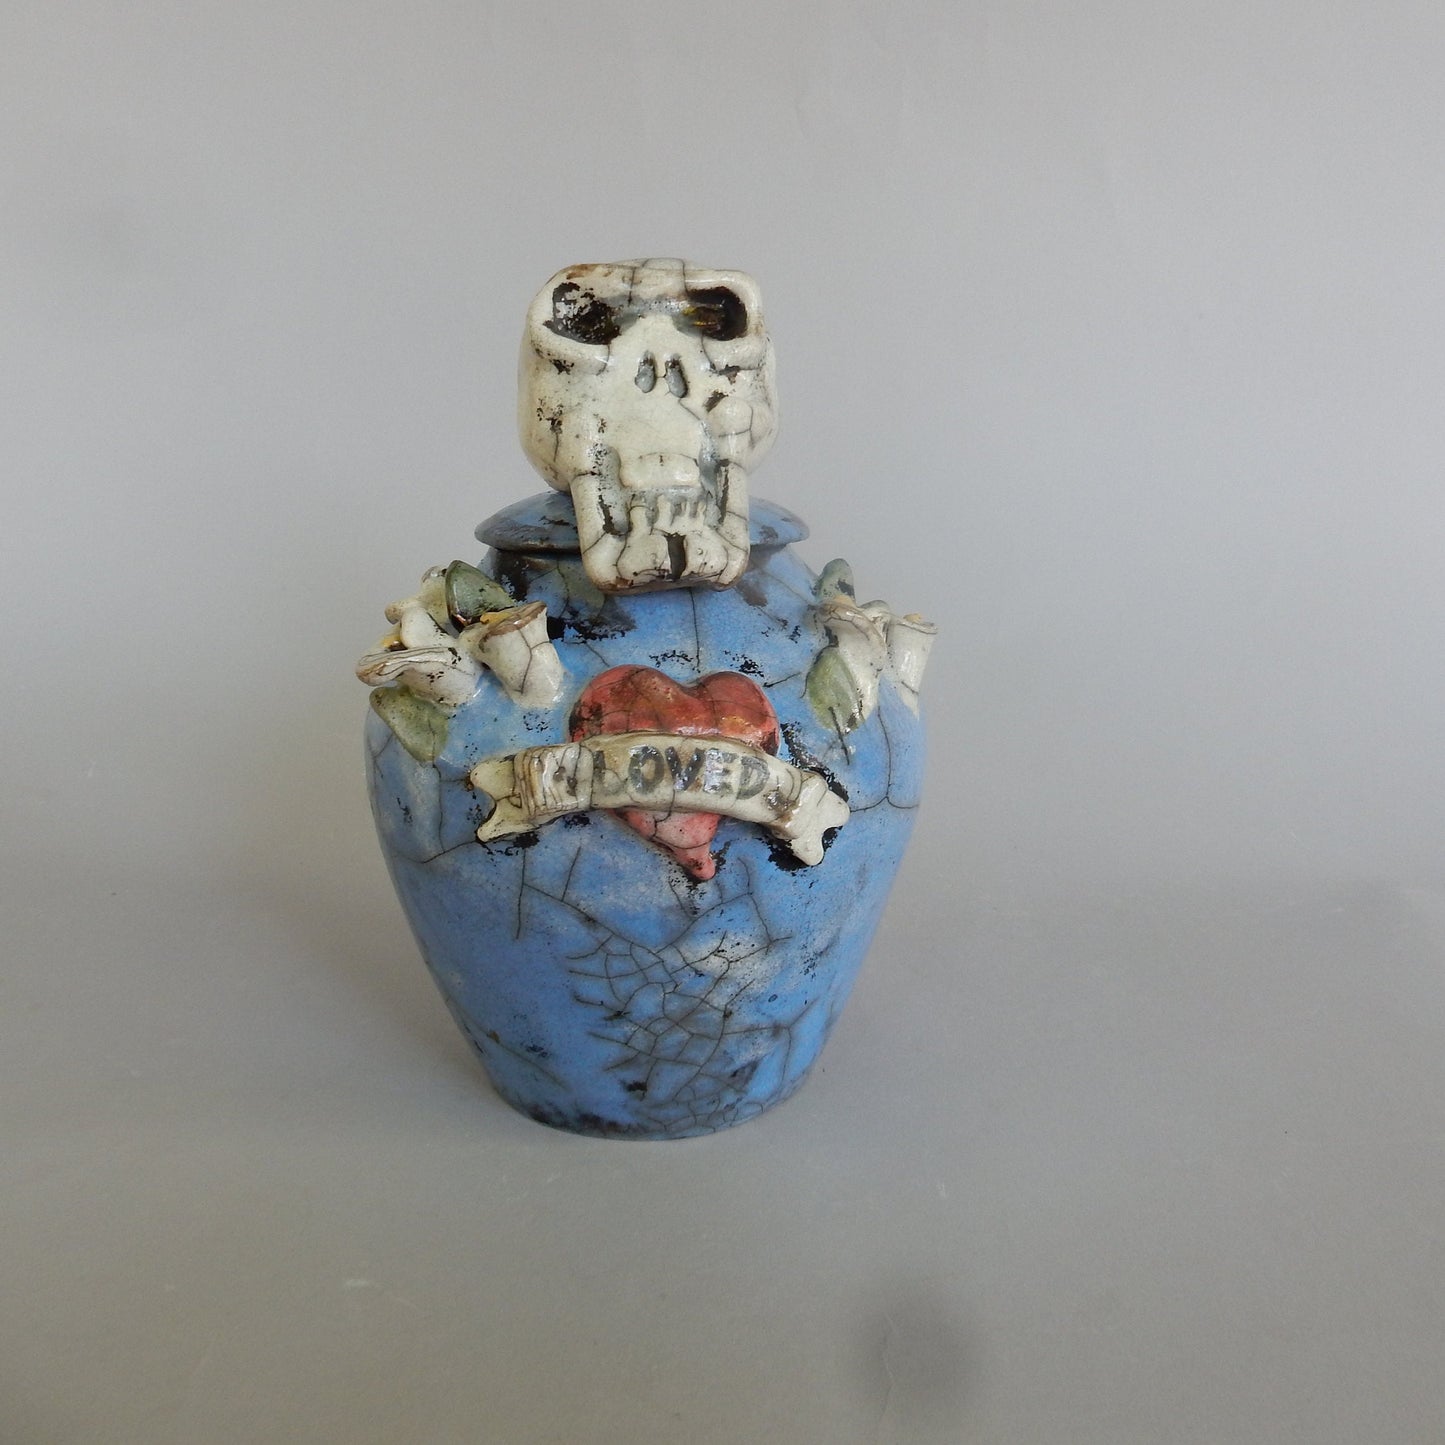 Skeleton Urn - Loved with Lilies